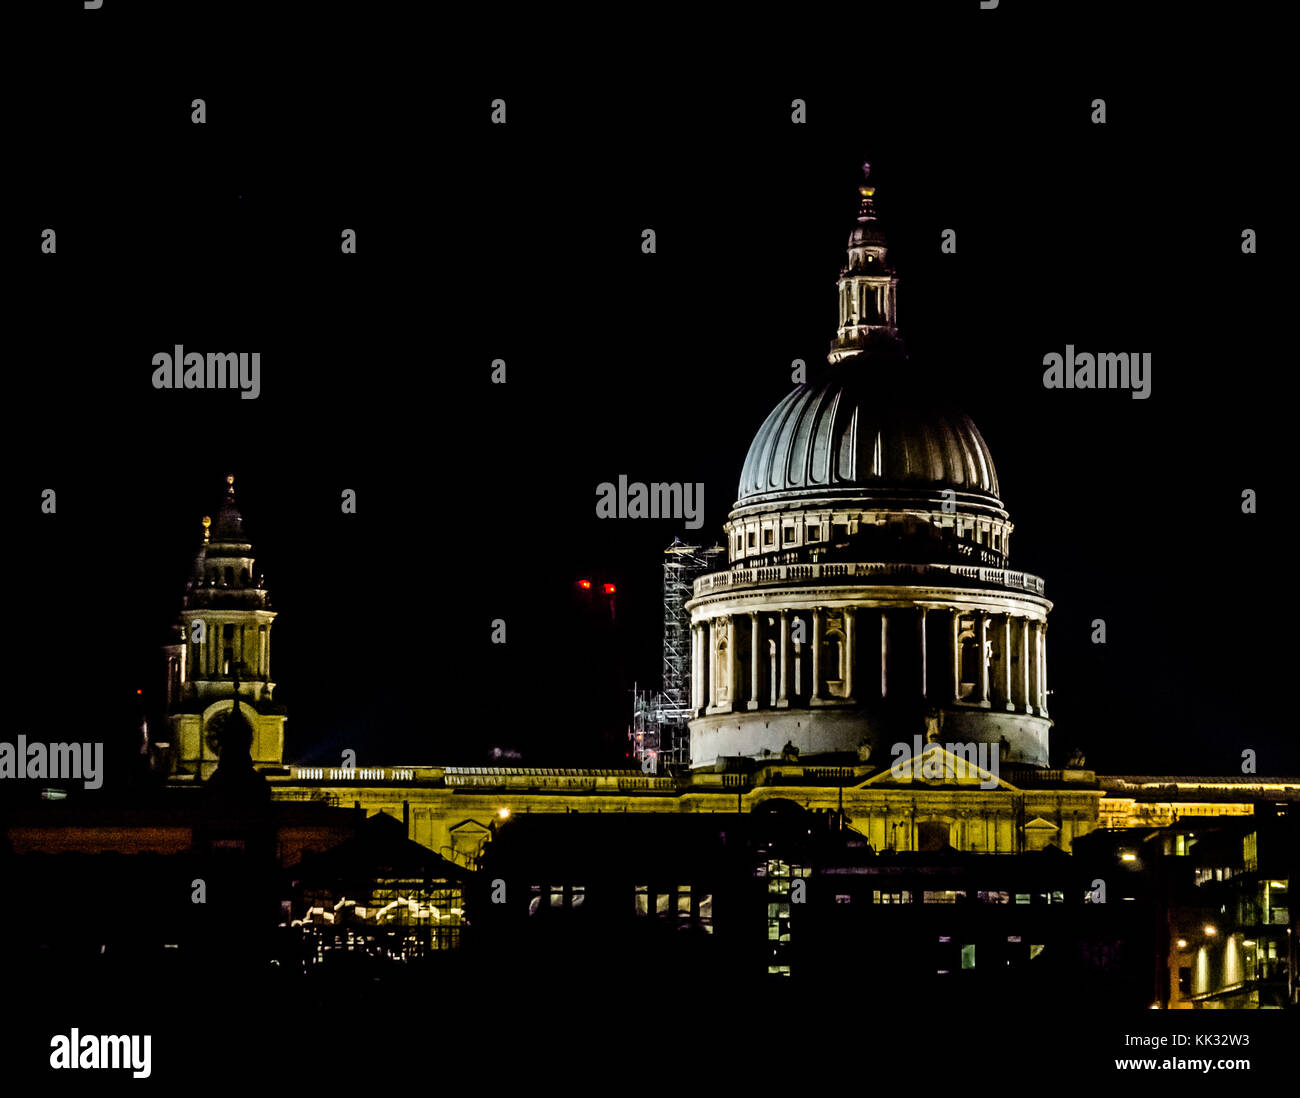 View of St Pauls Cathedral dome lit up at night with shadows of spires, London, England, UK Stock Photo